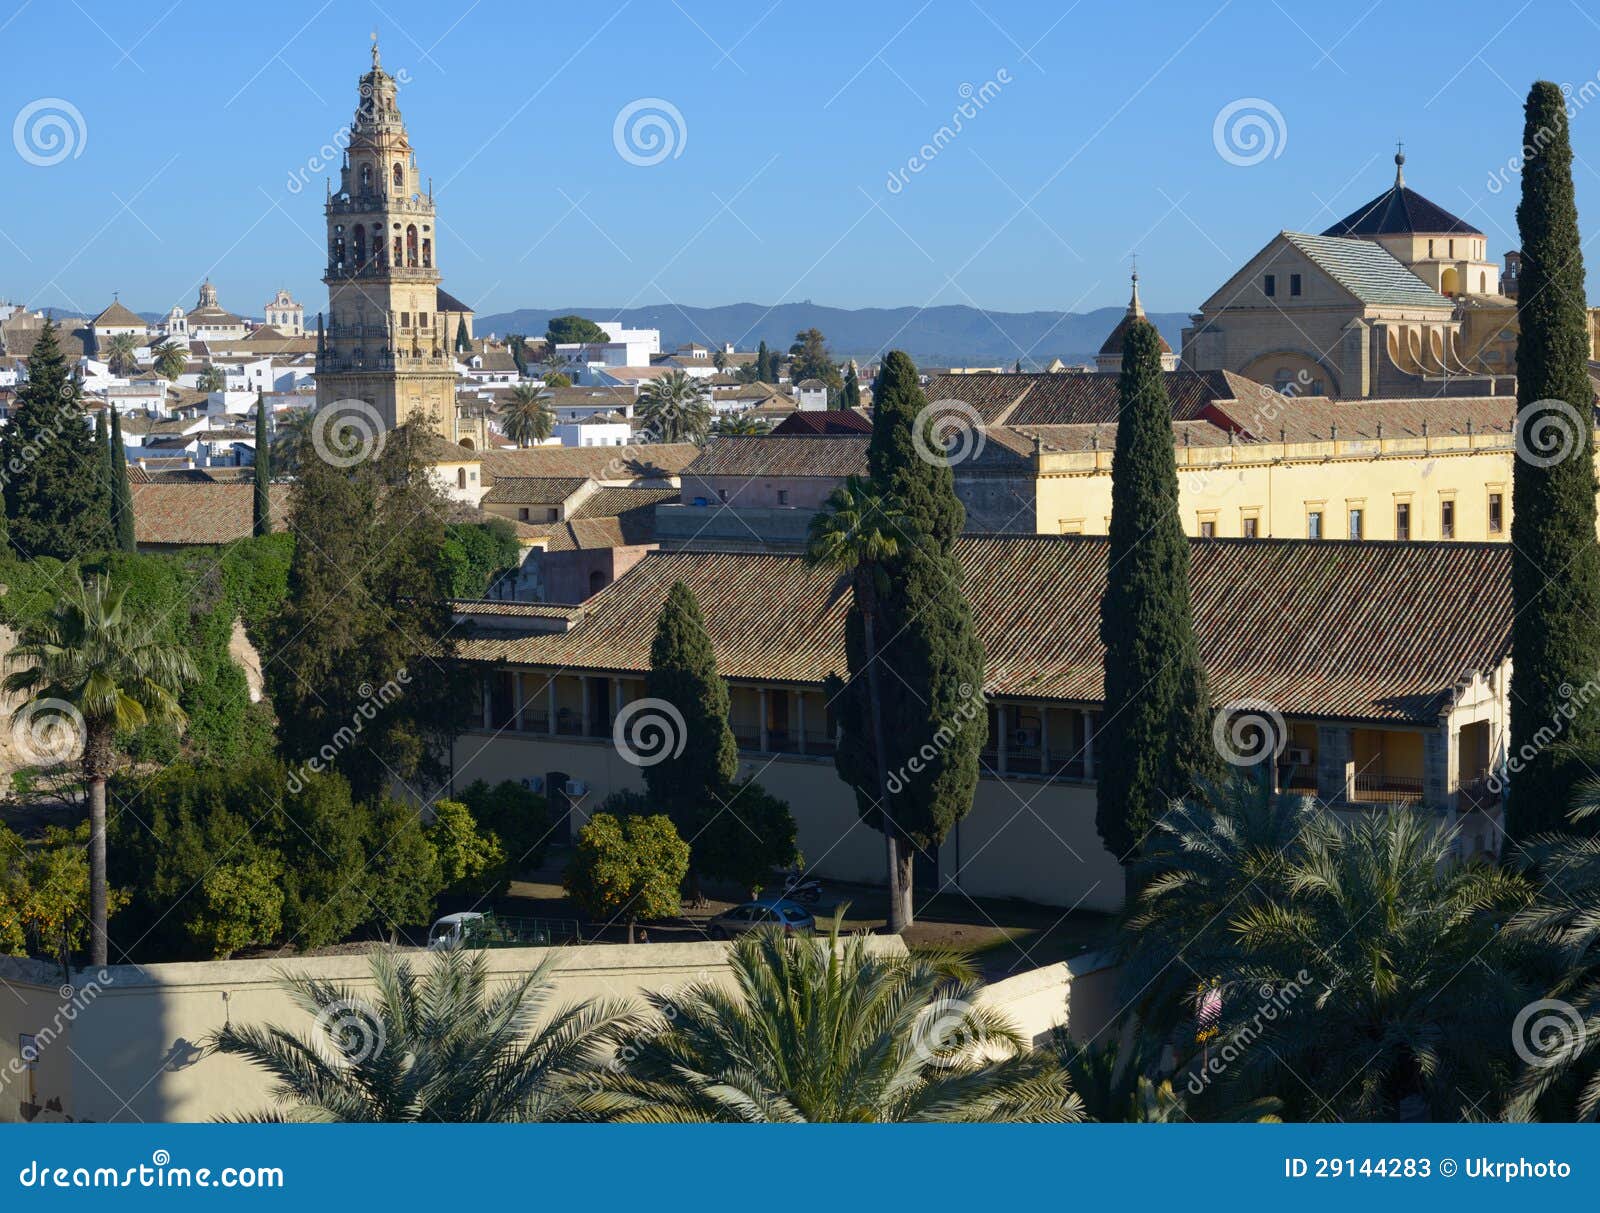 view to mezquita cathedral in cordoba, spain